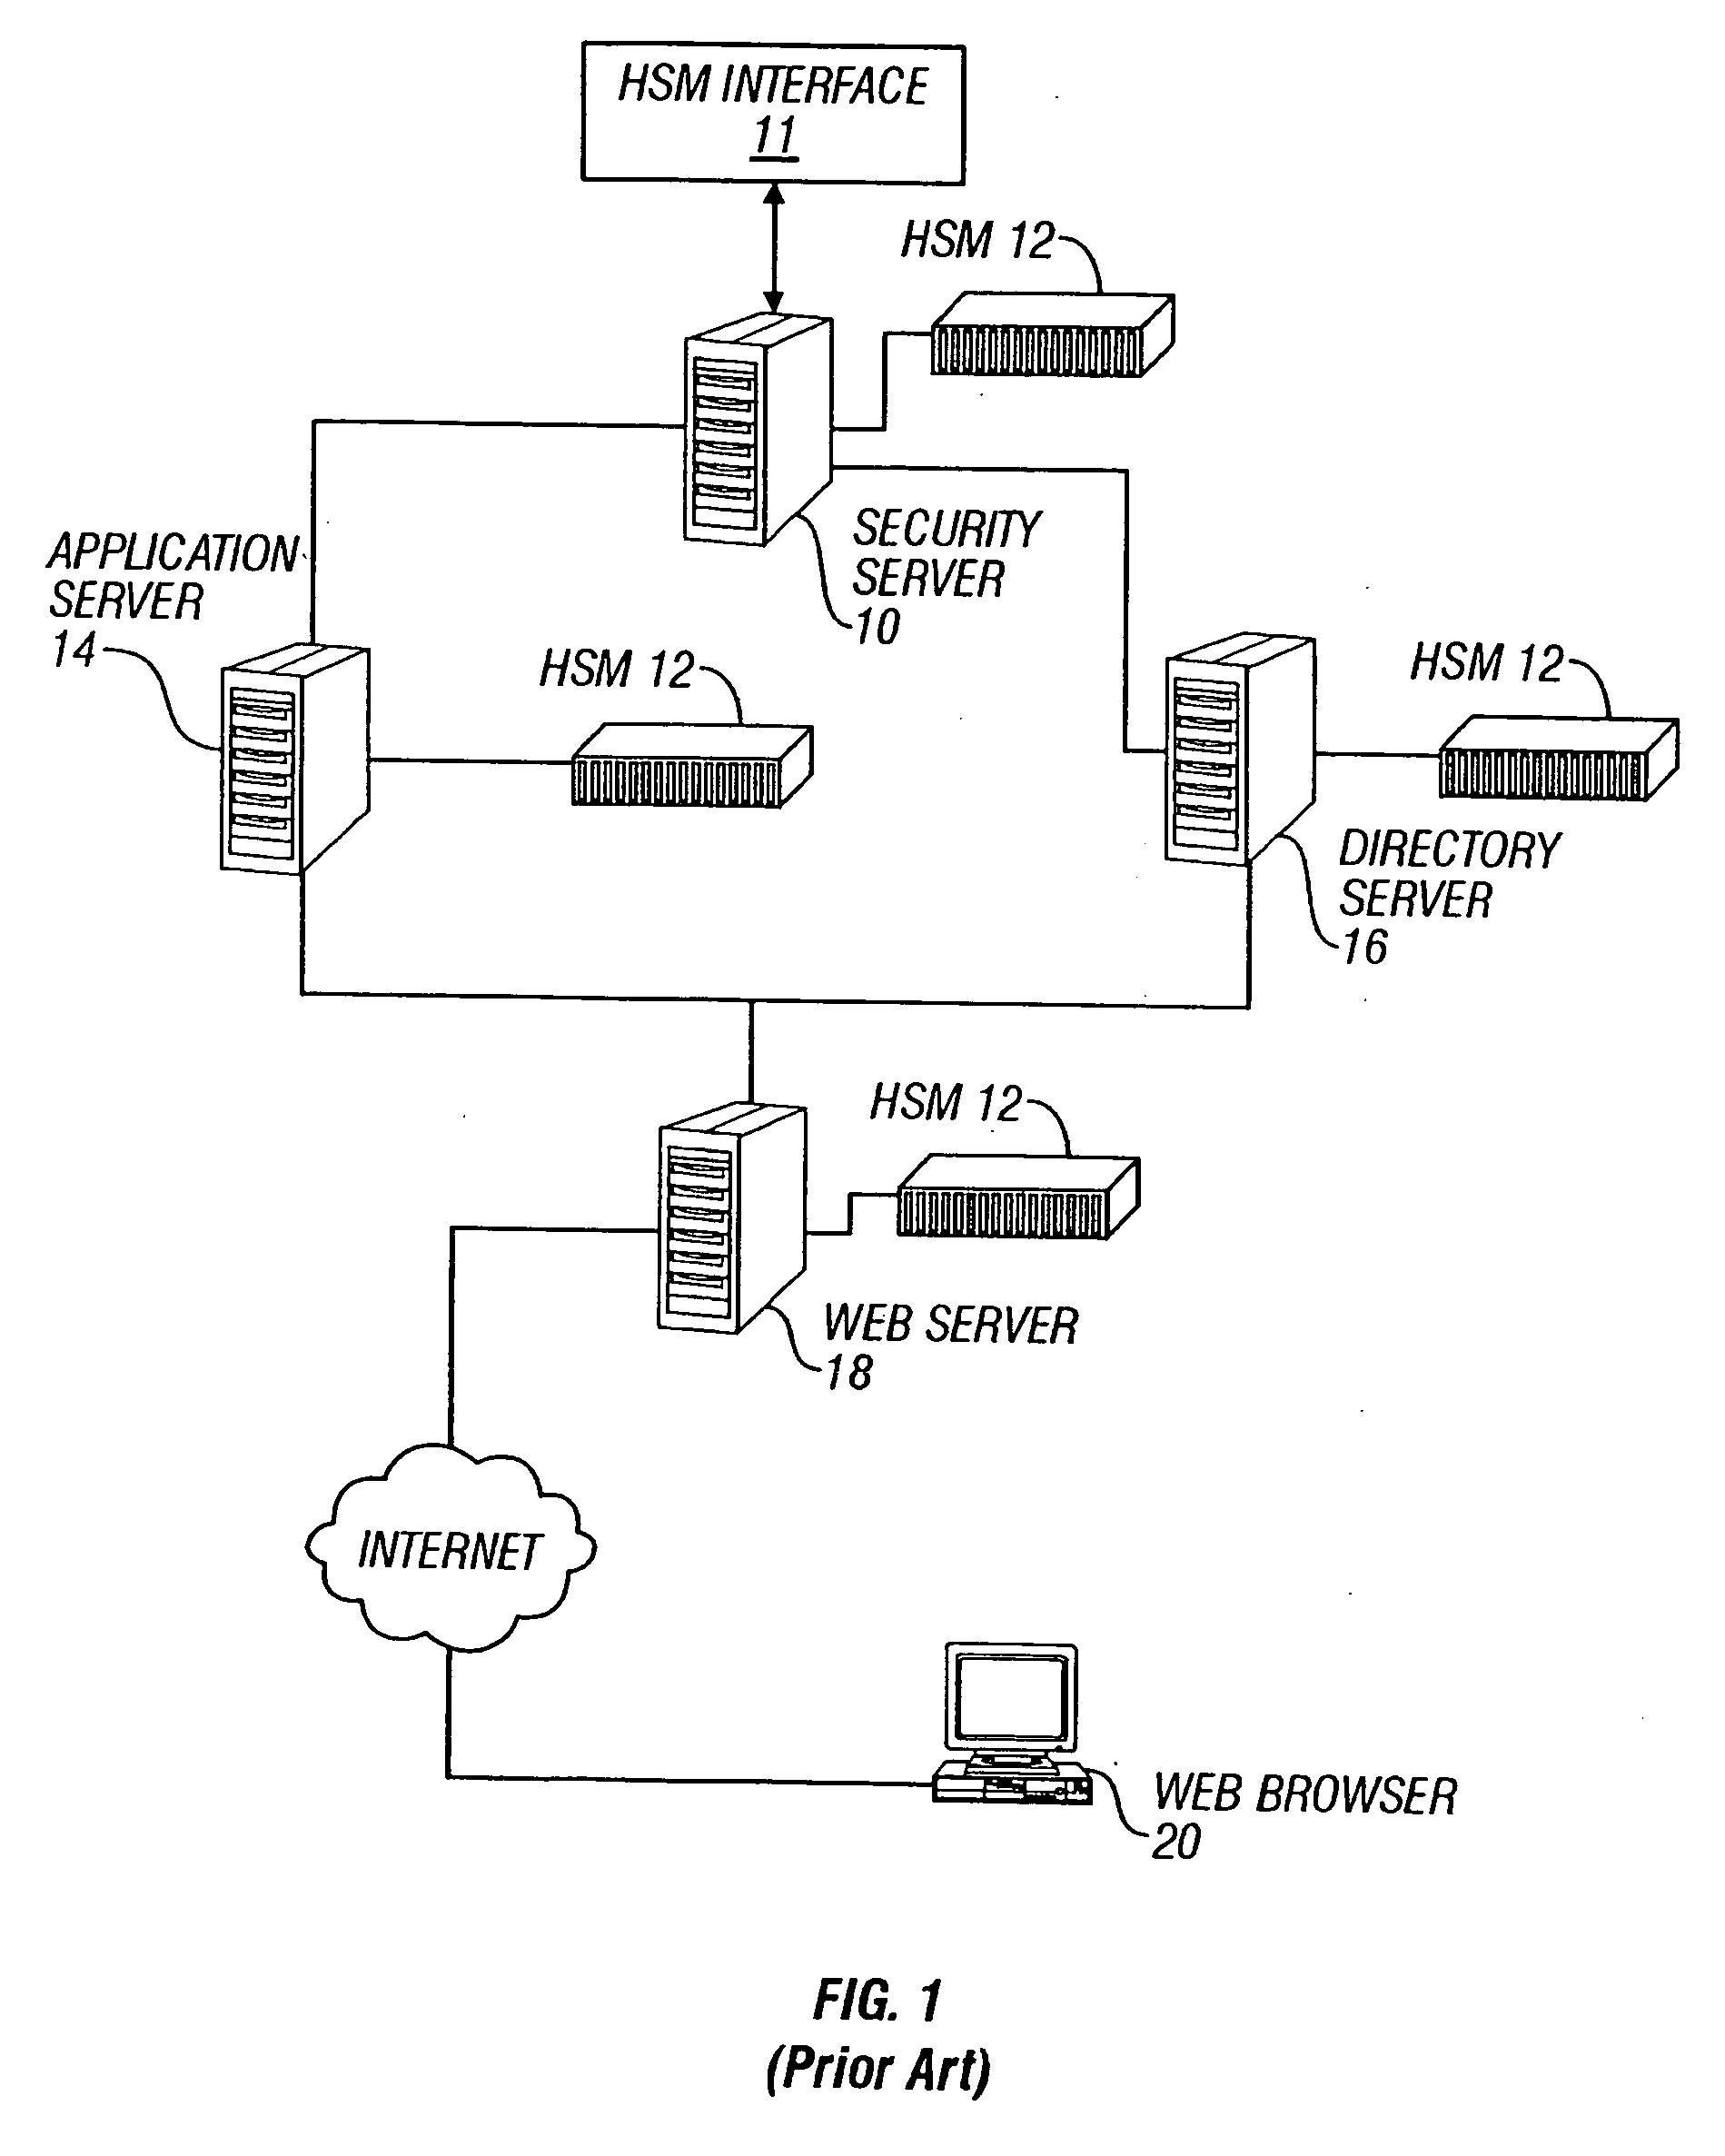 Method and apparatus for managing a key management system